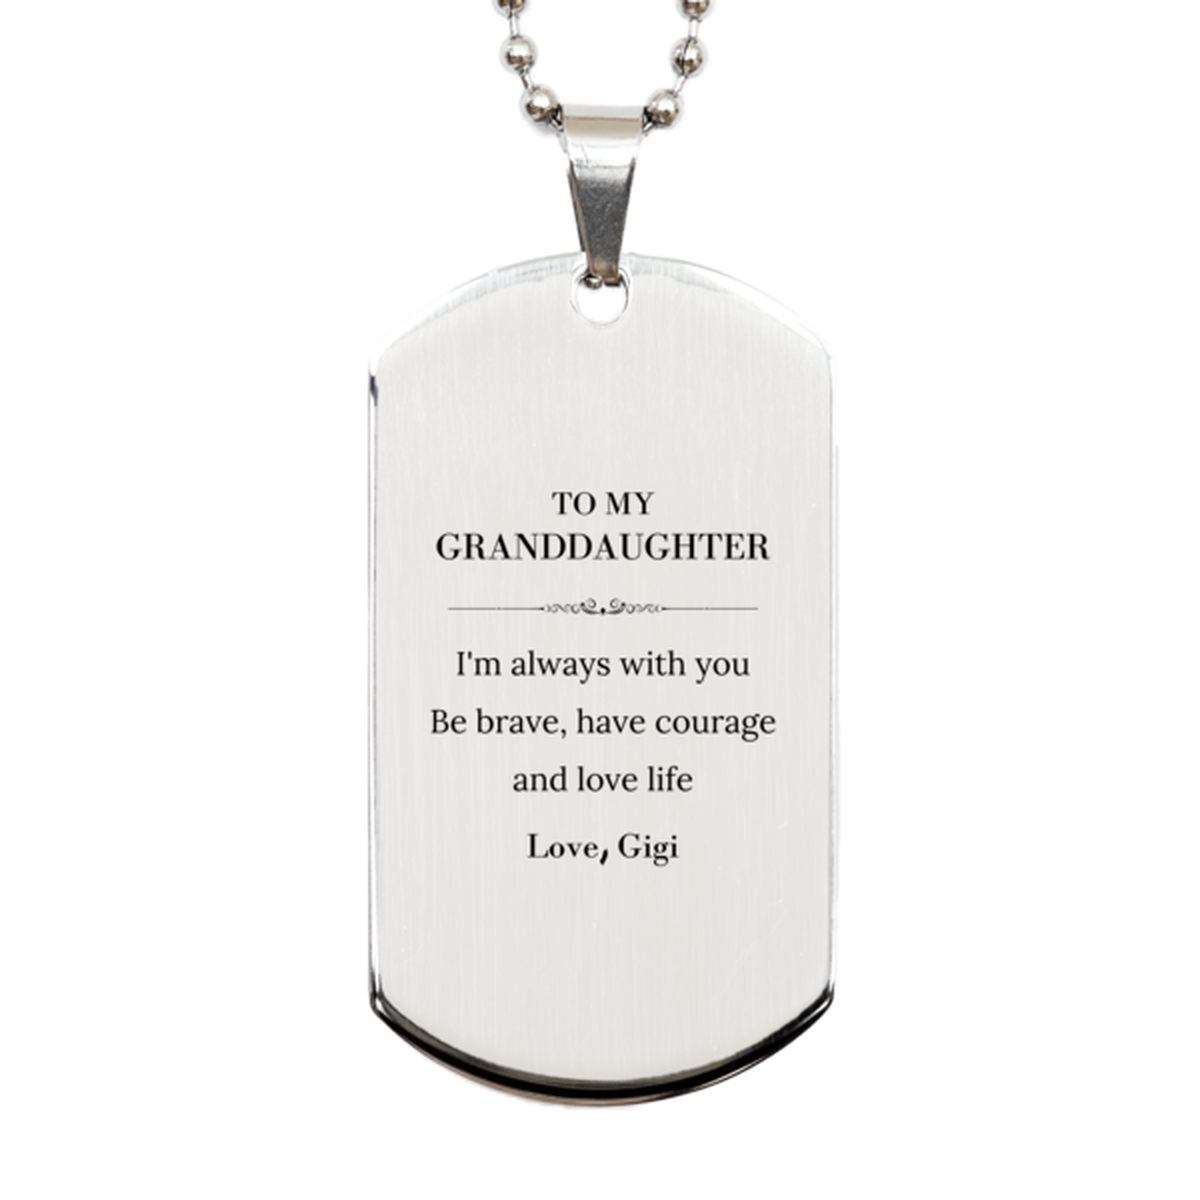 To My Granddaughter Gifts from Gigi, Unique Silver Dog Tag Inspirational Christmas Birthday Graduation Gifts for Granddaughter I'm always with you. Be brave, have courage and love life. Love, Gigi